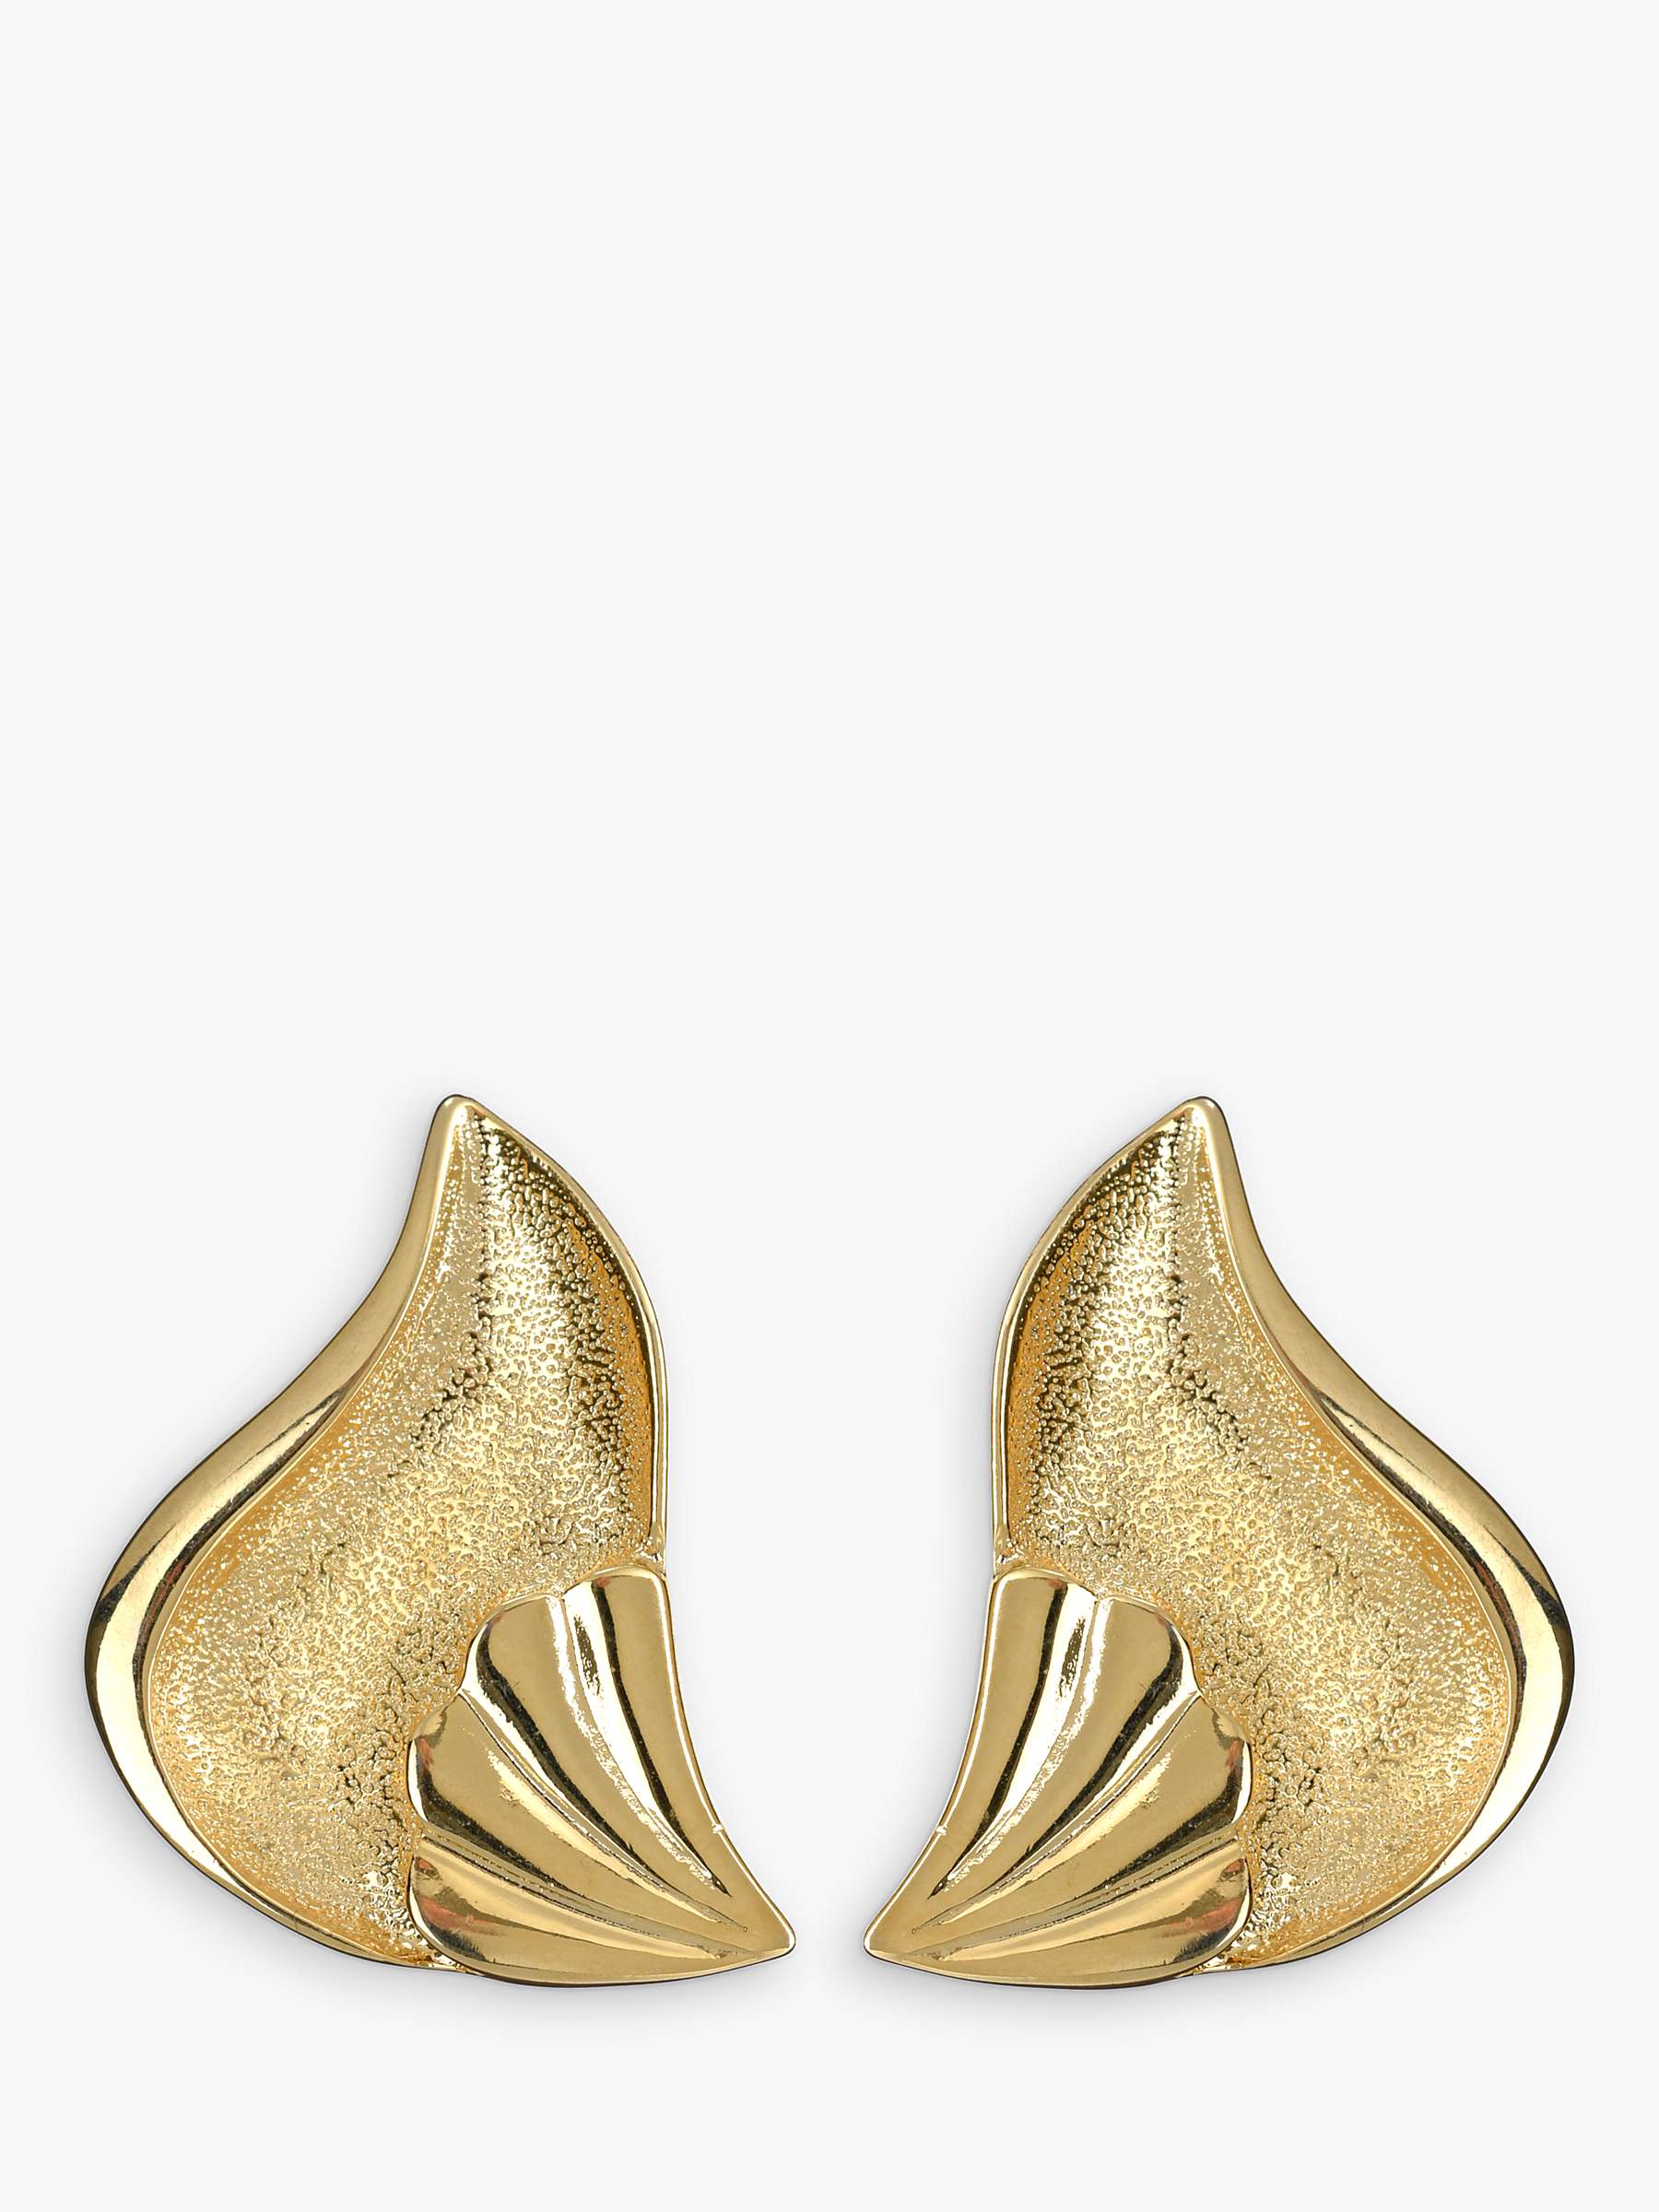 Buy Eclectica Vintage Ear Lobe Cover Clip-On Earrings, Dated Circa 1980s Online at johnlewis.com